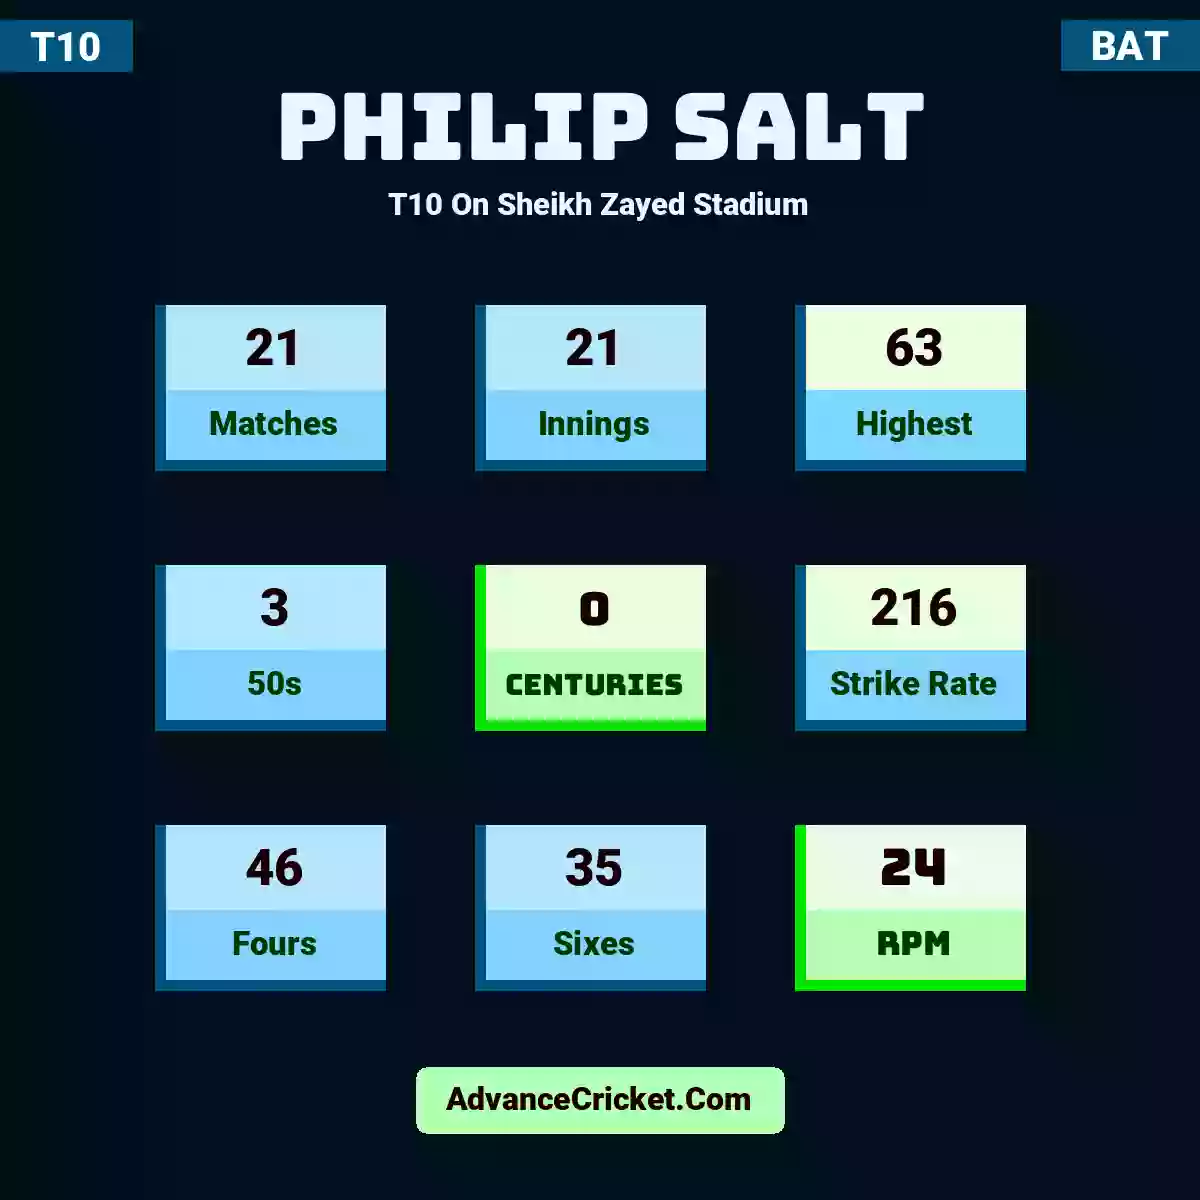 Philip Salt T10  On Sheikh Zayed Stadium, Philip Salt played 21 matches, scored 63 runs as highest, 3 half-centuries, and 0 centuries, with a strike rate of 216. P.Salt hit 46 fours and 35 sixes, with an RPM of 24.